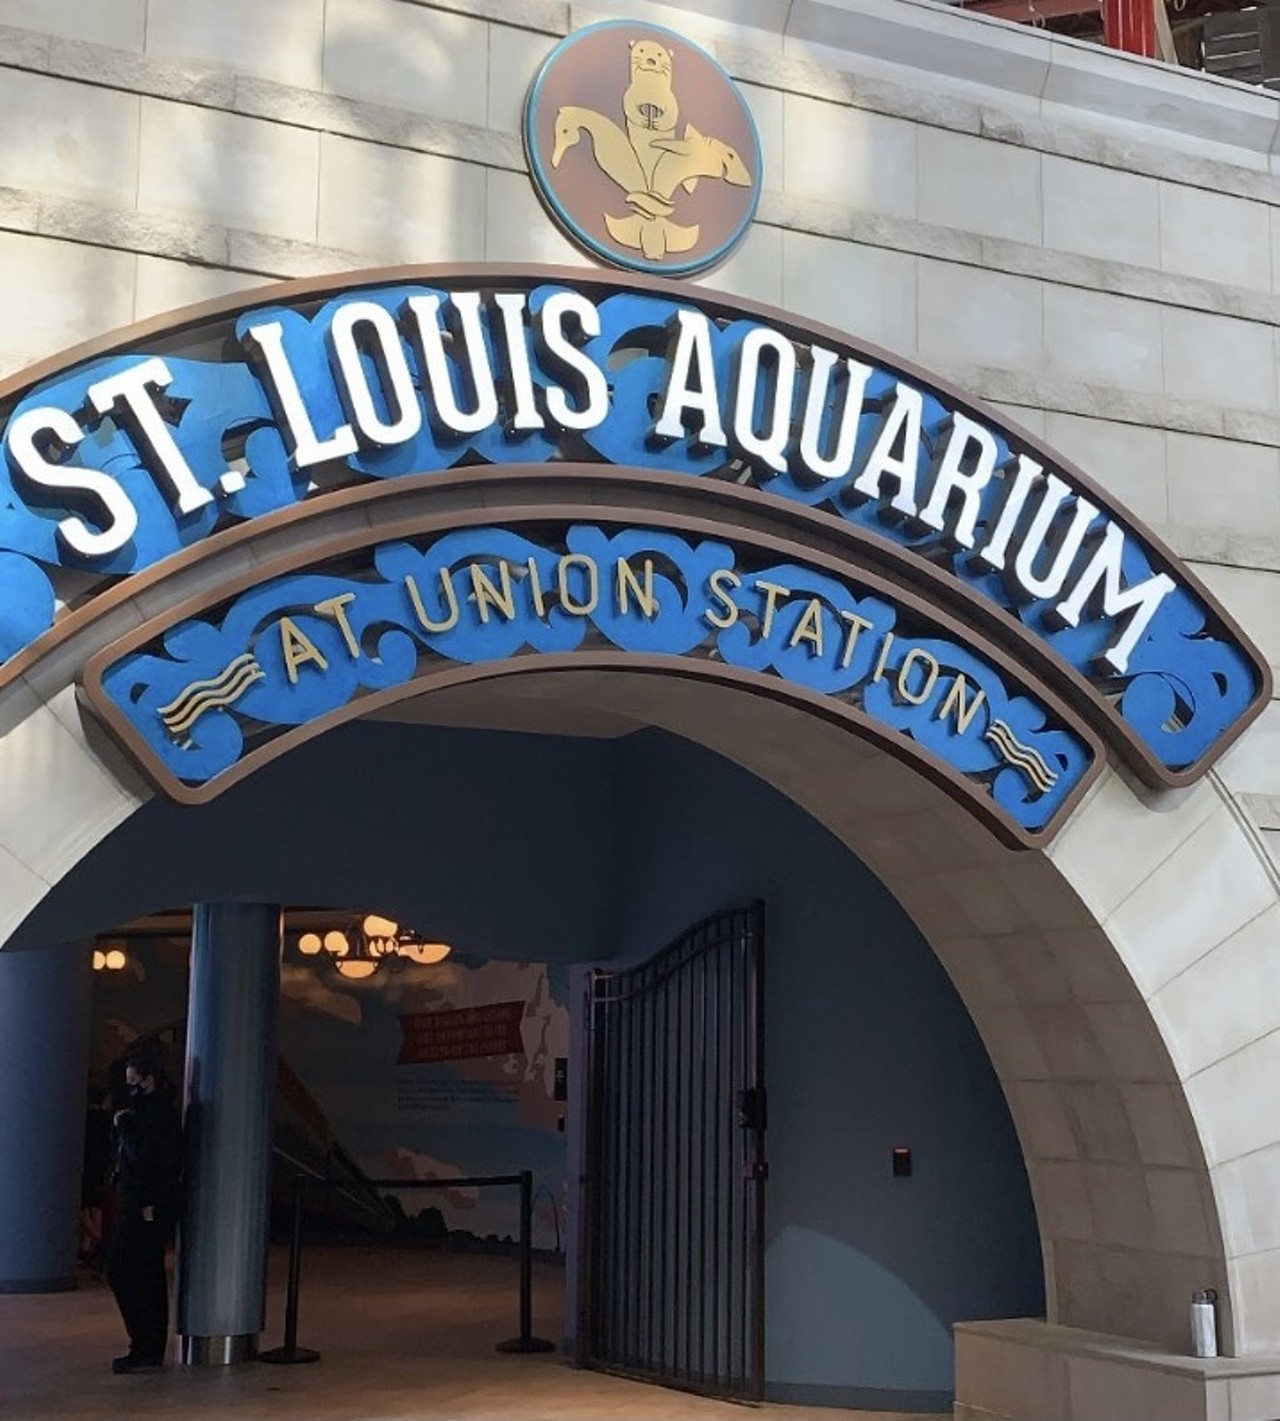 St. Louis Aquarium
Located in St. Louis Union Station (201 S 18th Street)
General admission $25 for adults and $18 for children 3-12
Photo credit: Riverfront Times / @riverfronttimes on Instagram